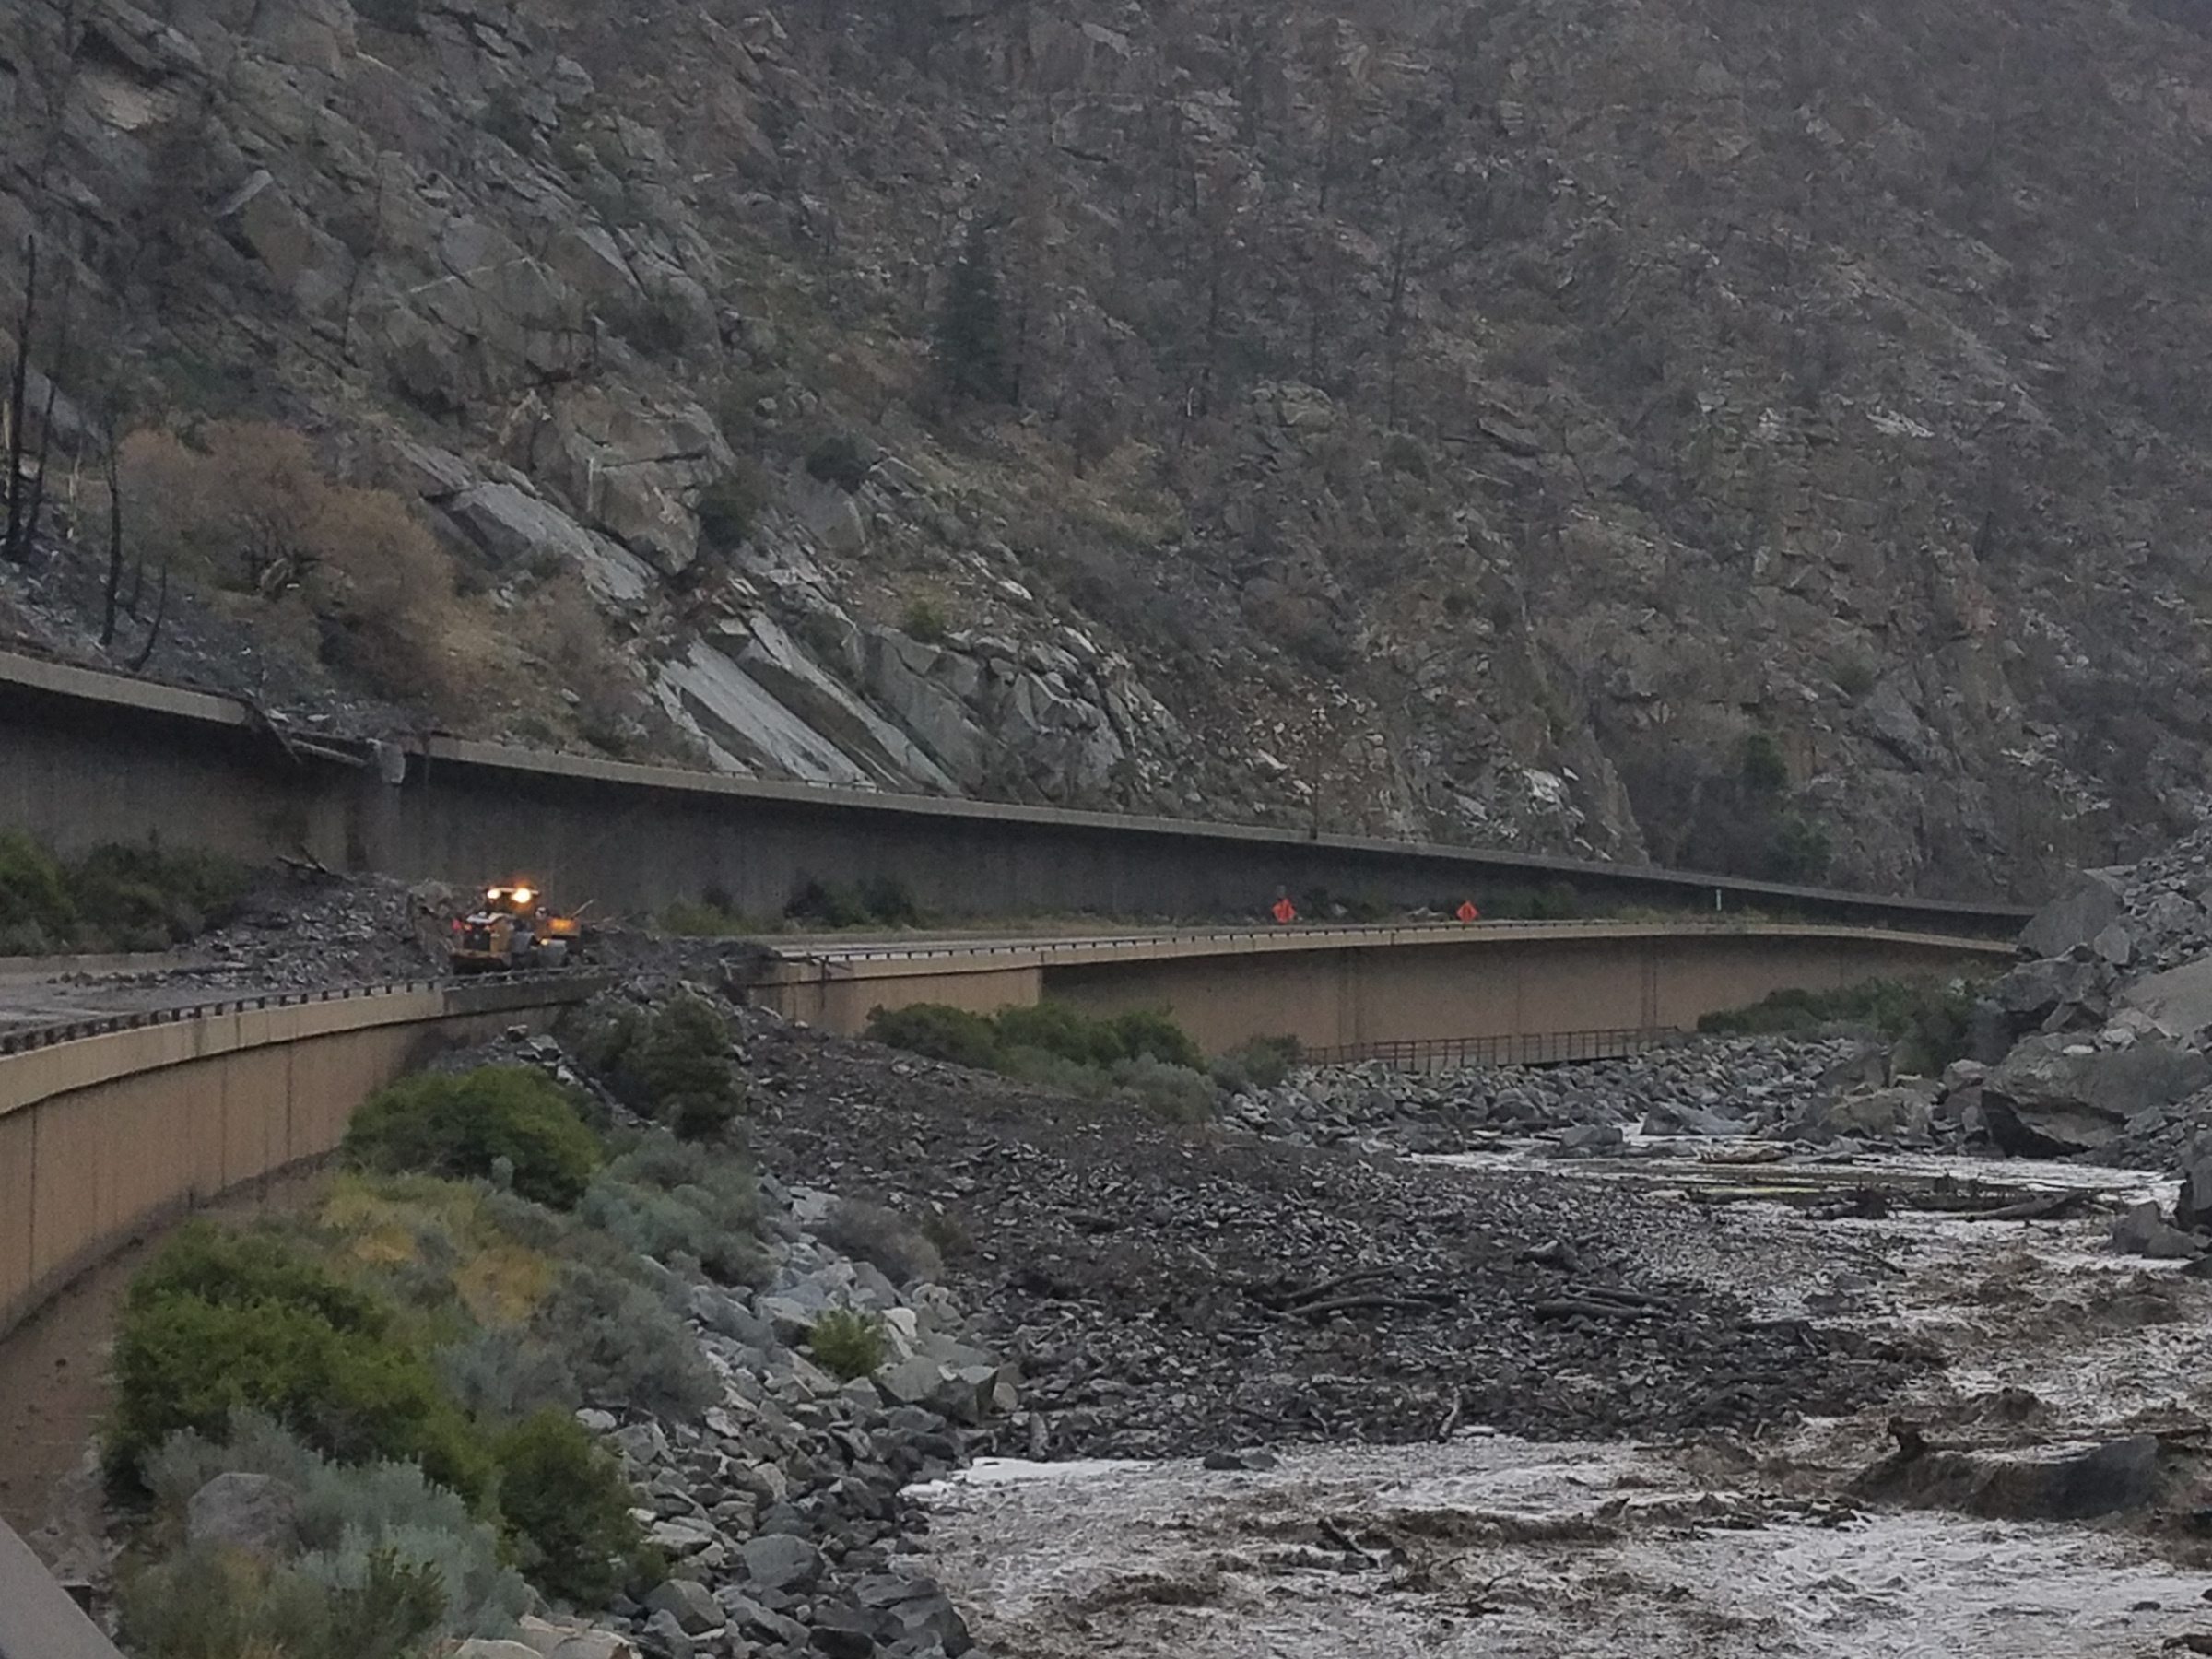 Equipment works to clear mud and debris from a mudslide on Interstate-70 through Glenwood Canyon, Colorado